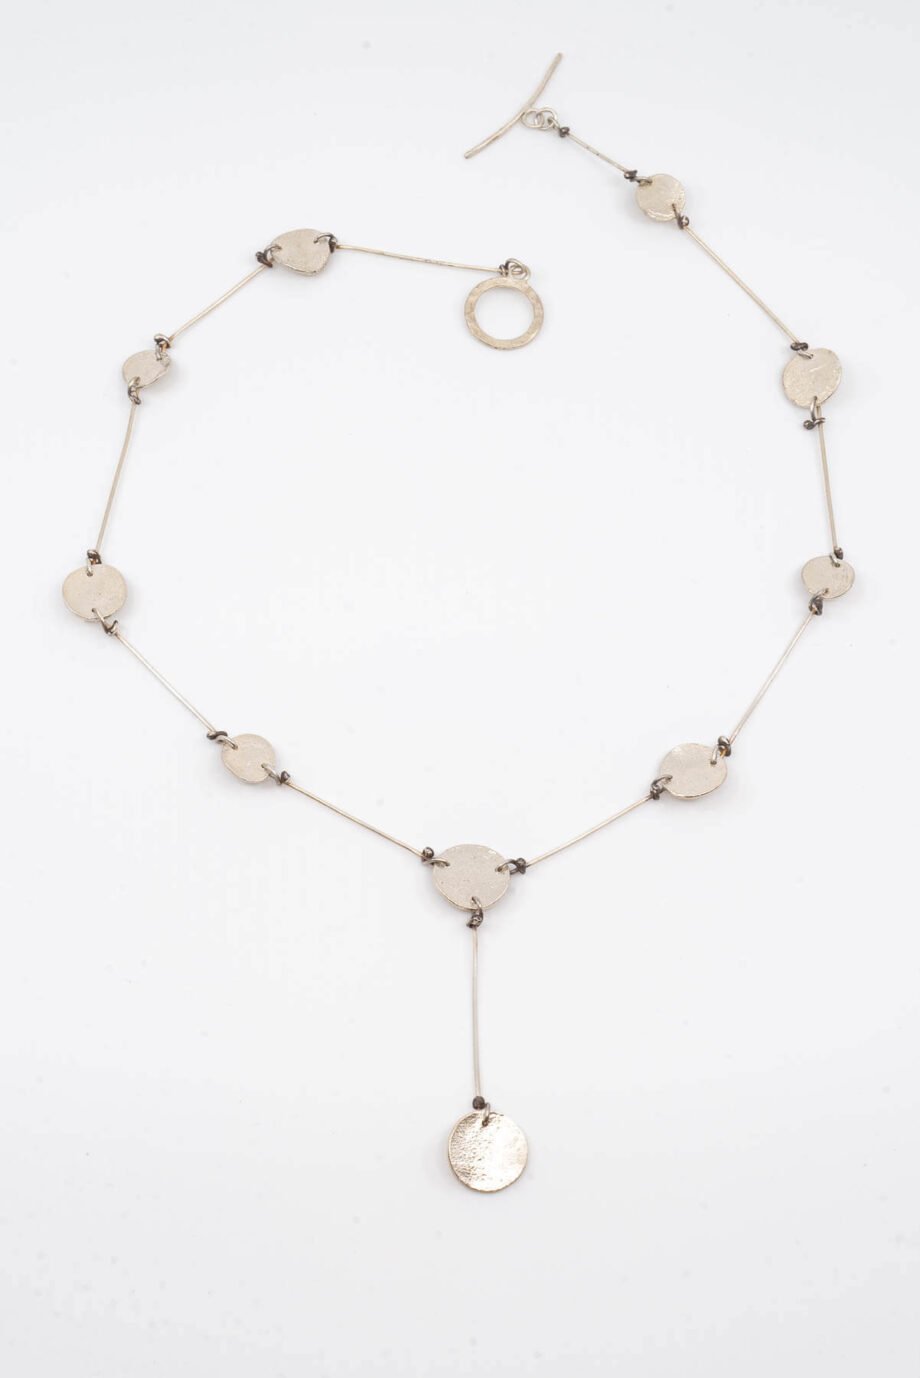 Marilena Synthesis Necklace 74 313